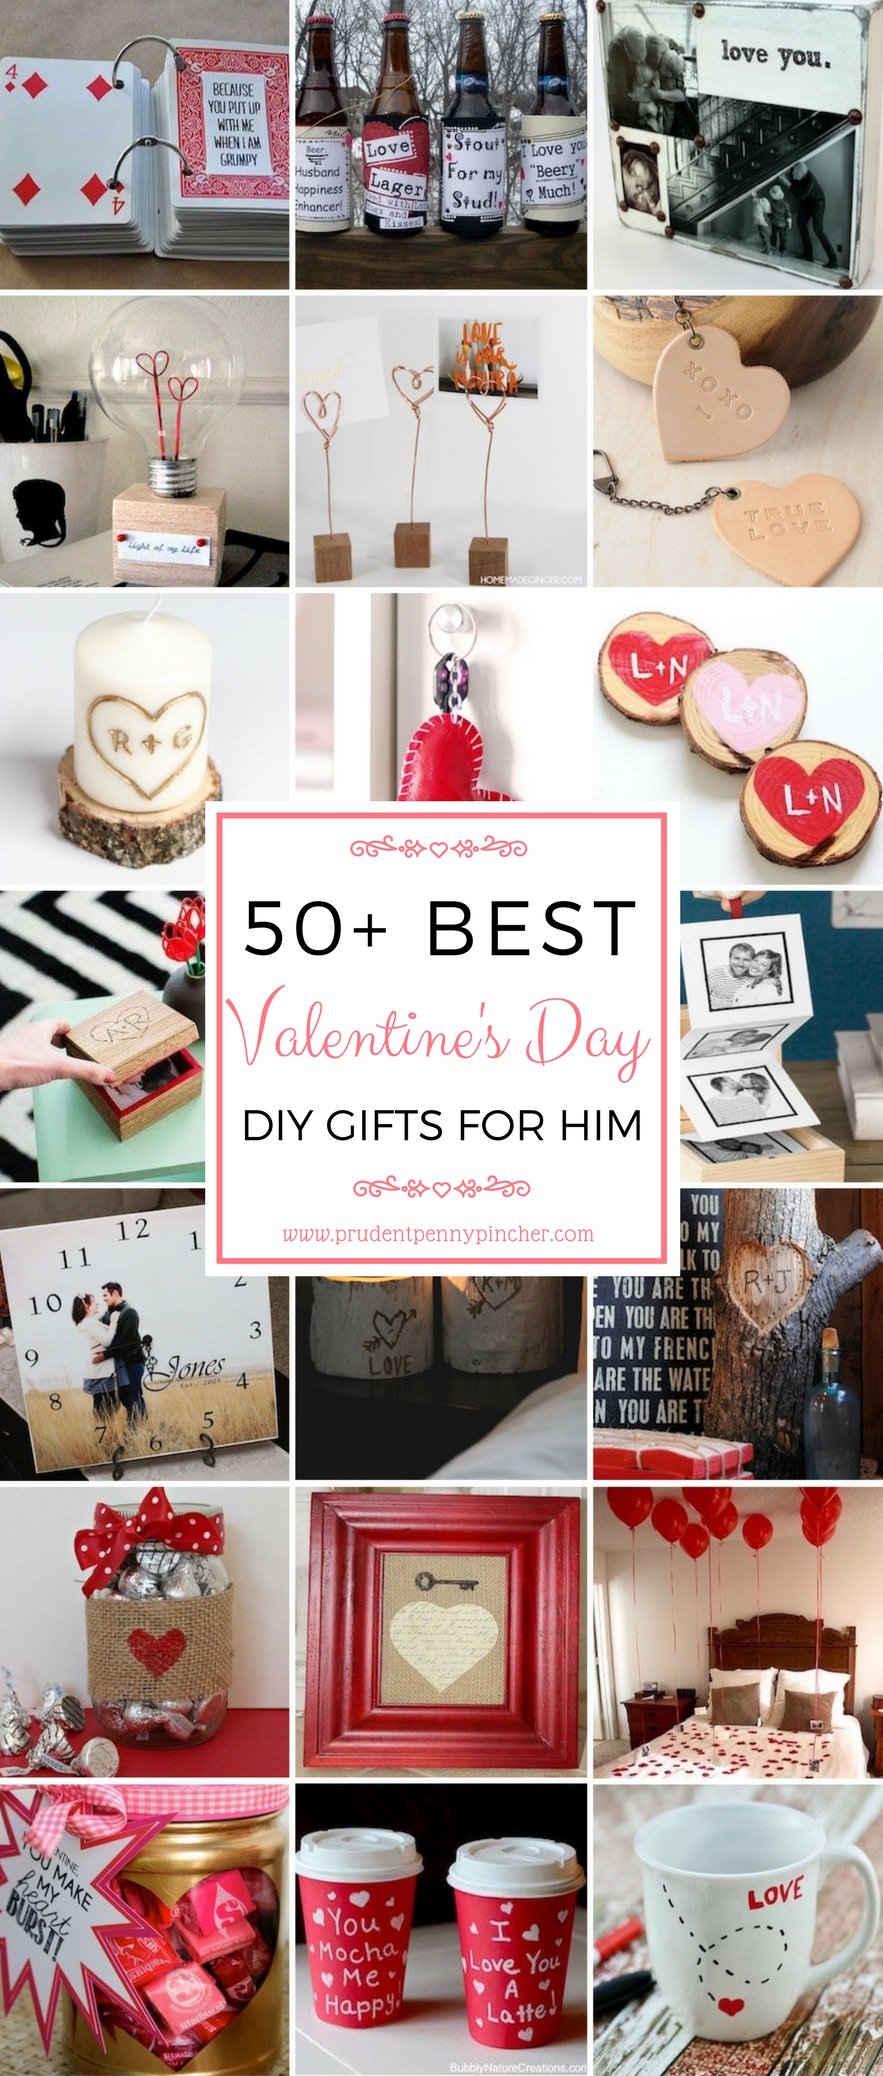 50 DIY Valentines Day Gifts for Him - Prudent Penny Pincher